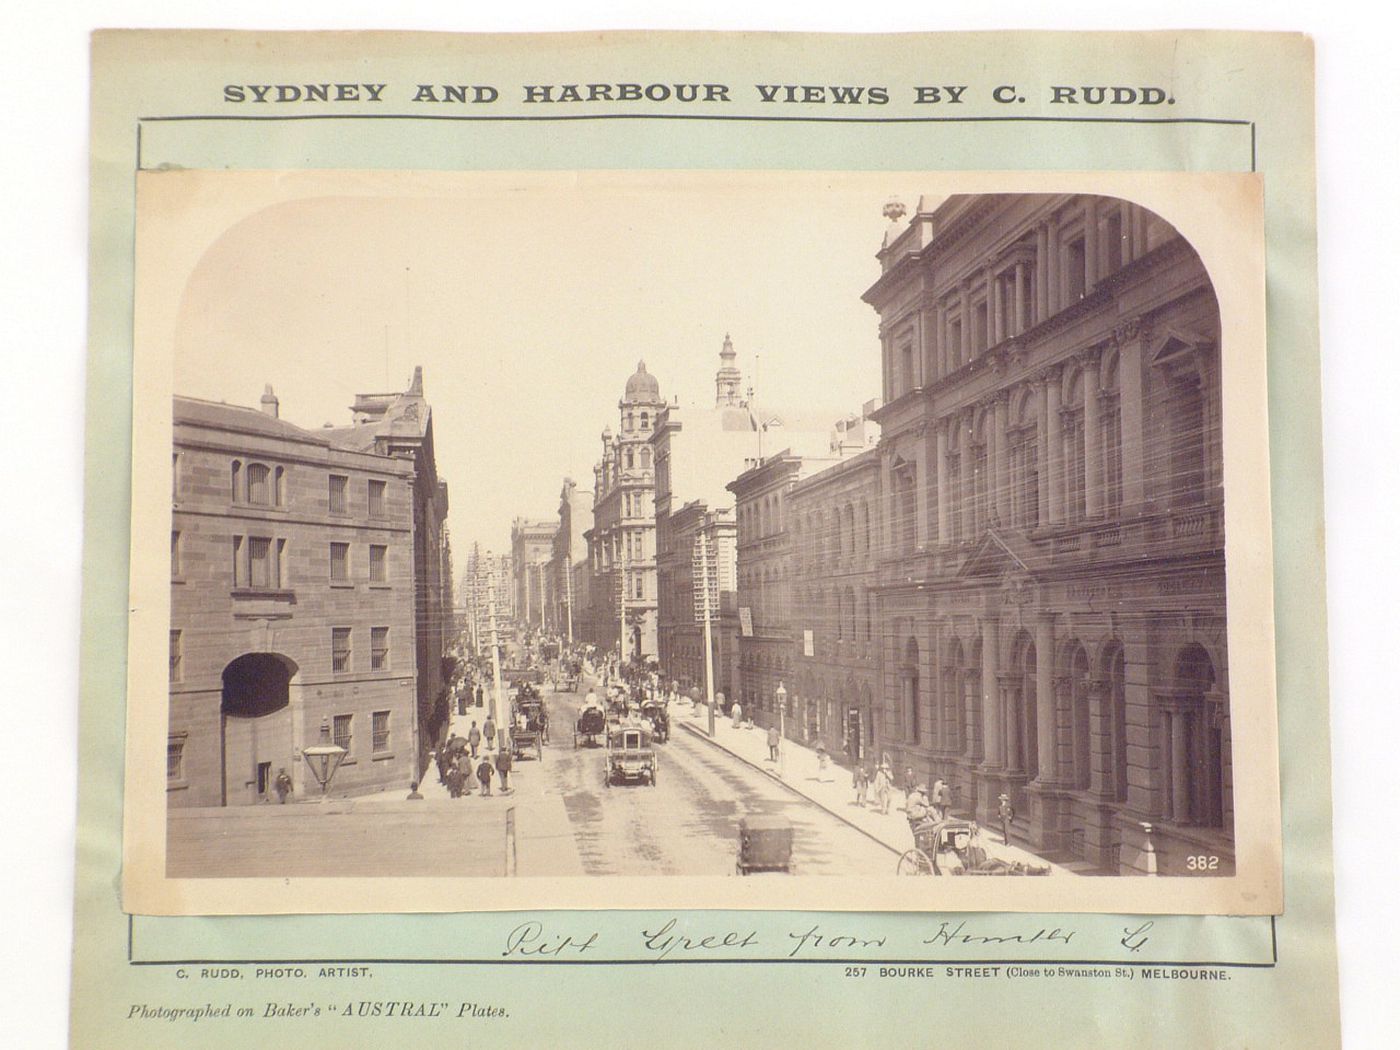 View of Pitt Street from Hunter Street showing the Australian Mutual Provident Society building on the right, Sydney, Australia